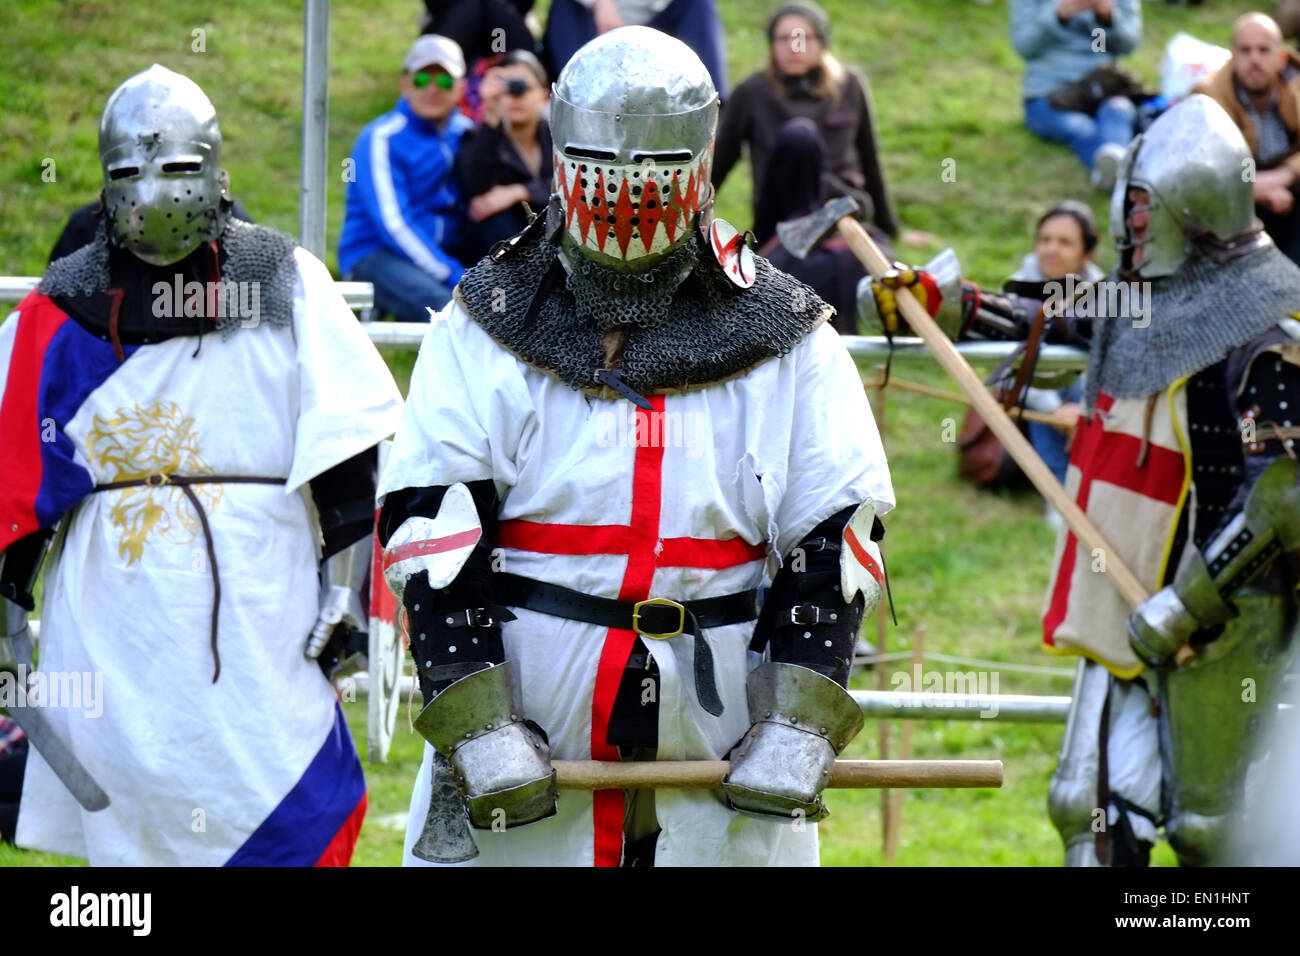 London, UK. 25th Apr, 2015. A tournament of medieval combat. In a  full-contact, armoured,competition, knights from around the globe compete  to be crowned the first London Champion. Credit: Rachel Megawhat/Alamy Live  News